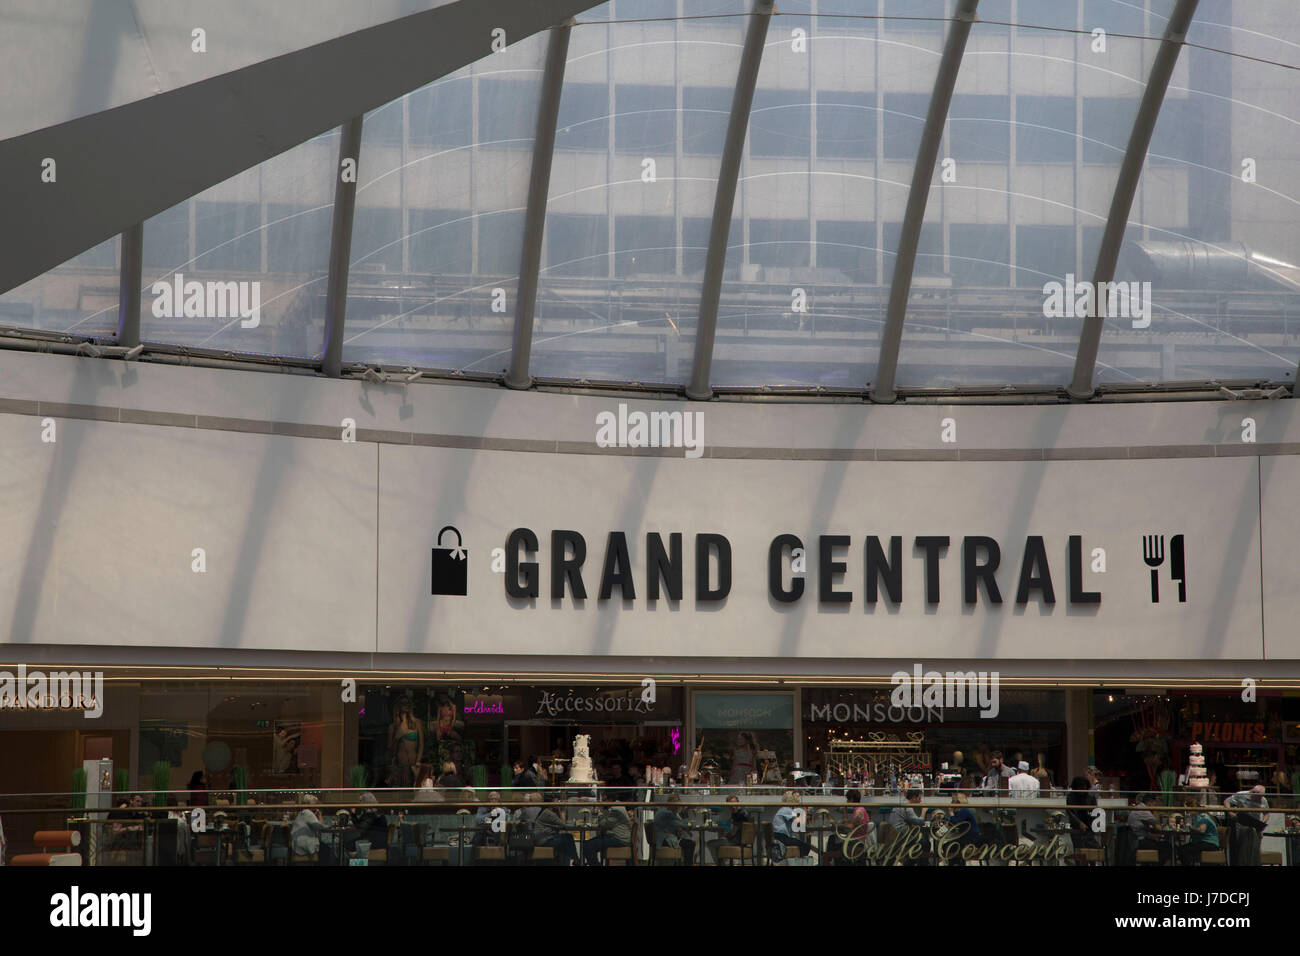 Interior of Grand Central in Birmingham, United Kingdom. Grand Central is a shopping centre located in Birmingham, England, that opened on 24 September 2015. It is currently owned by Hammerson and CPPIB. The original centre was built in 1971 as part of the reconstruction of Birmingham New Street station. It was known as the Birmingham Shopping Centre before being renamed as The Pallasades. As part of the New Street Station Gateway Plus redevelopment, Grand Central underwent a major overhaul. The mall has been redesigned with a glass atrium roof as centrepiece, and is home to over 60 stores wit Stock Photo